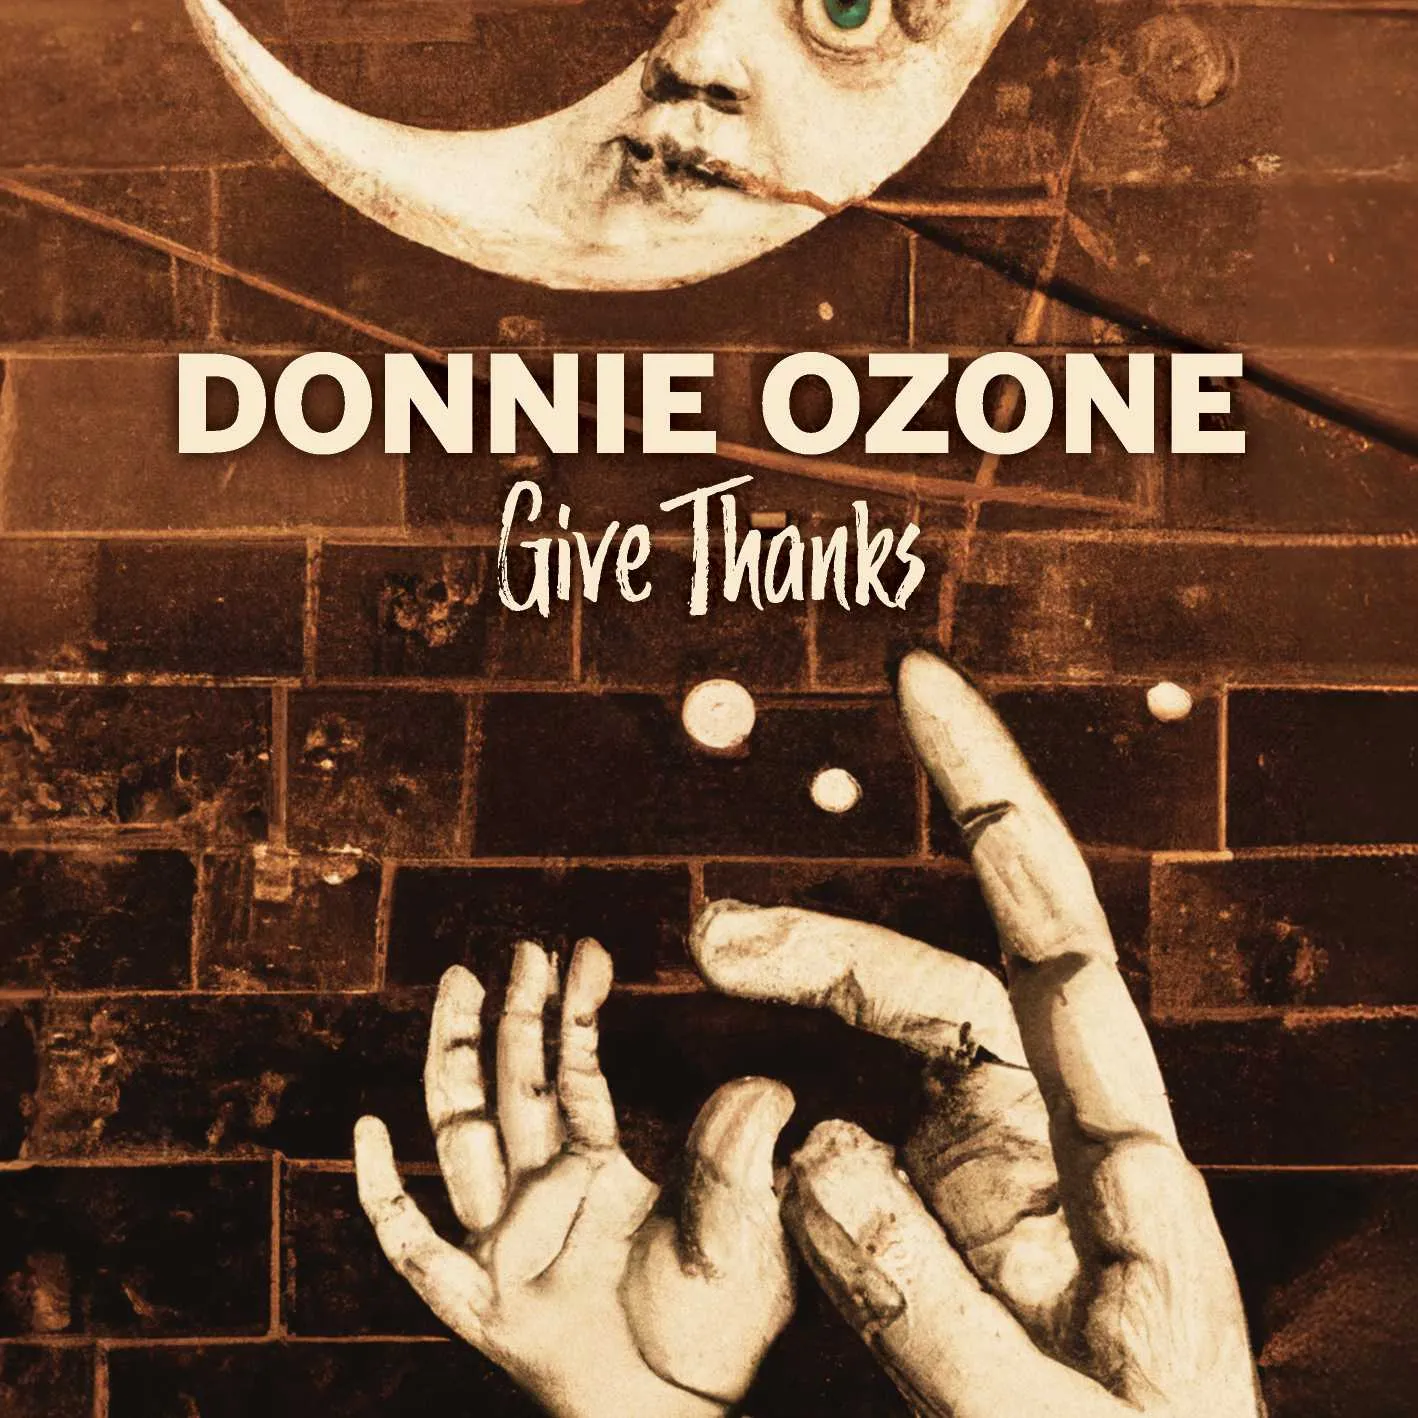 Album cover for “Give Thanks” by Donnie Ozone